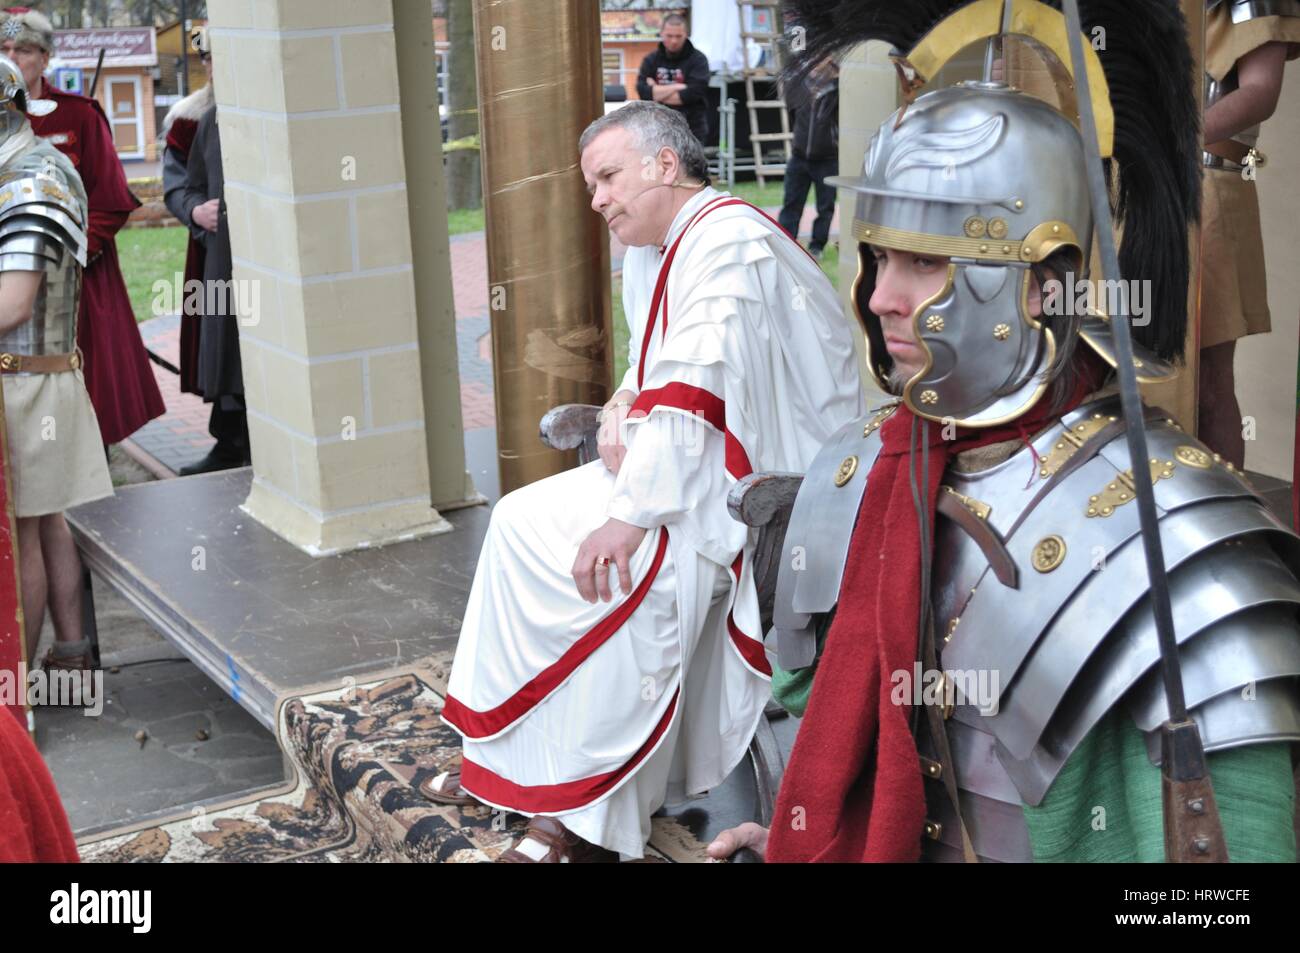 Actors reenact Pilate and security guard, during the street performances Mystery of the Passion. Stock Photo